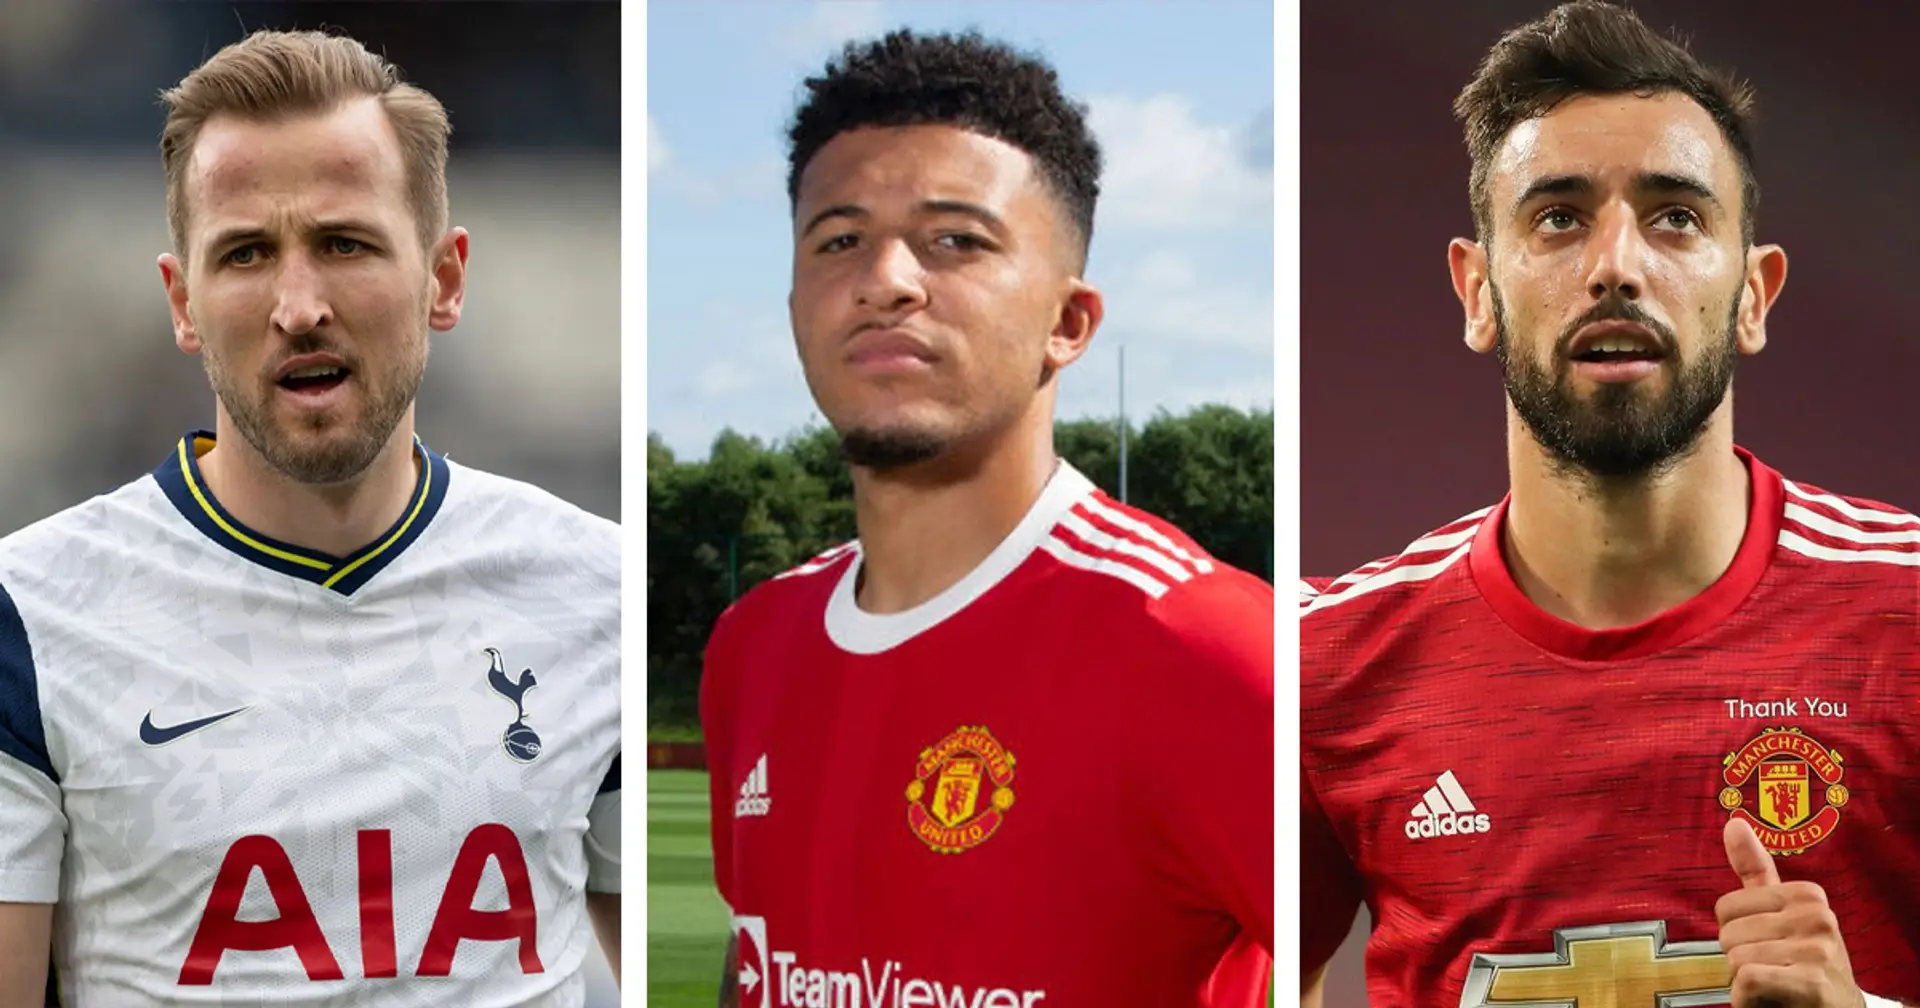 Below Kane but above Bruno: where Jadon Sancho stands among most valuable Premier League players